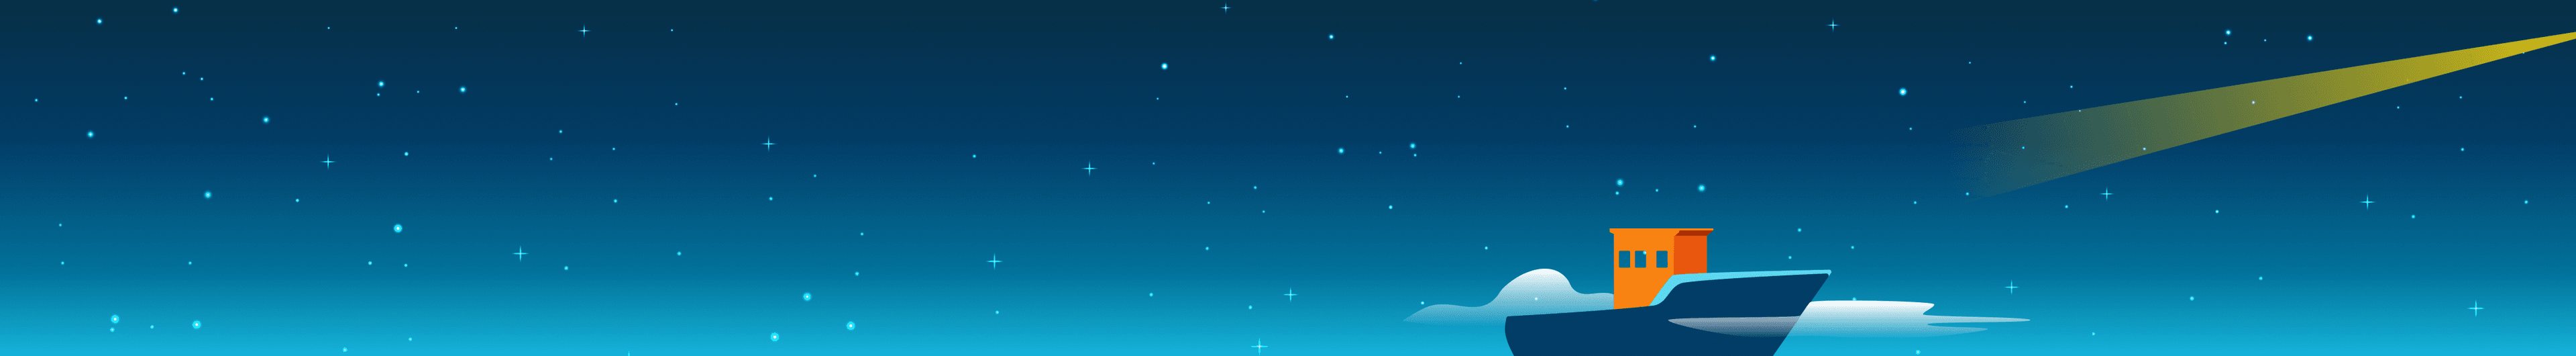 Night sky and boat illustration